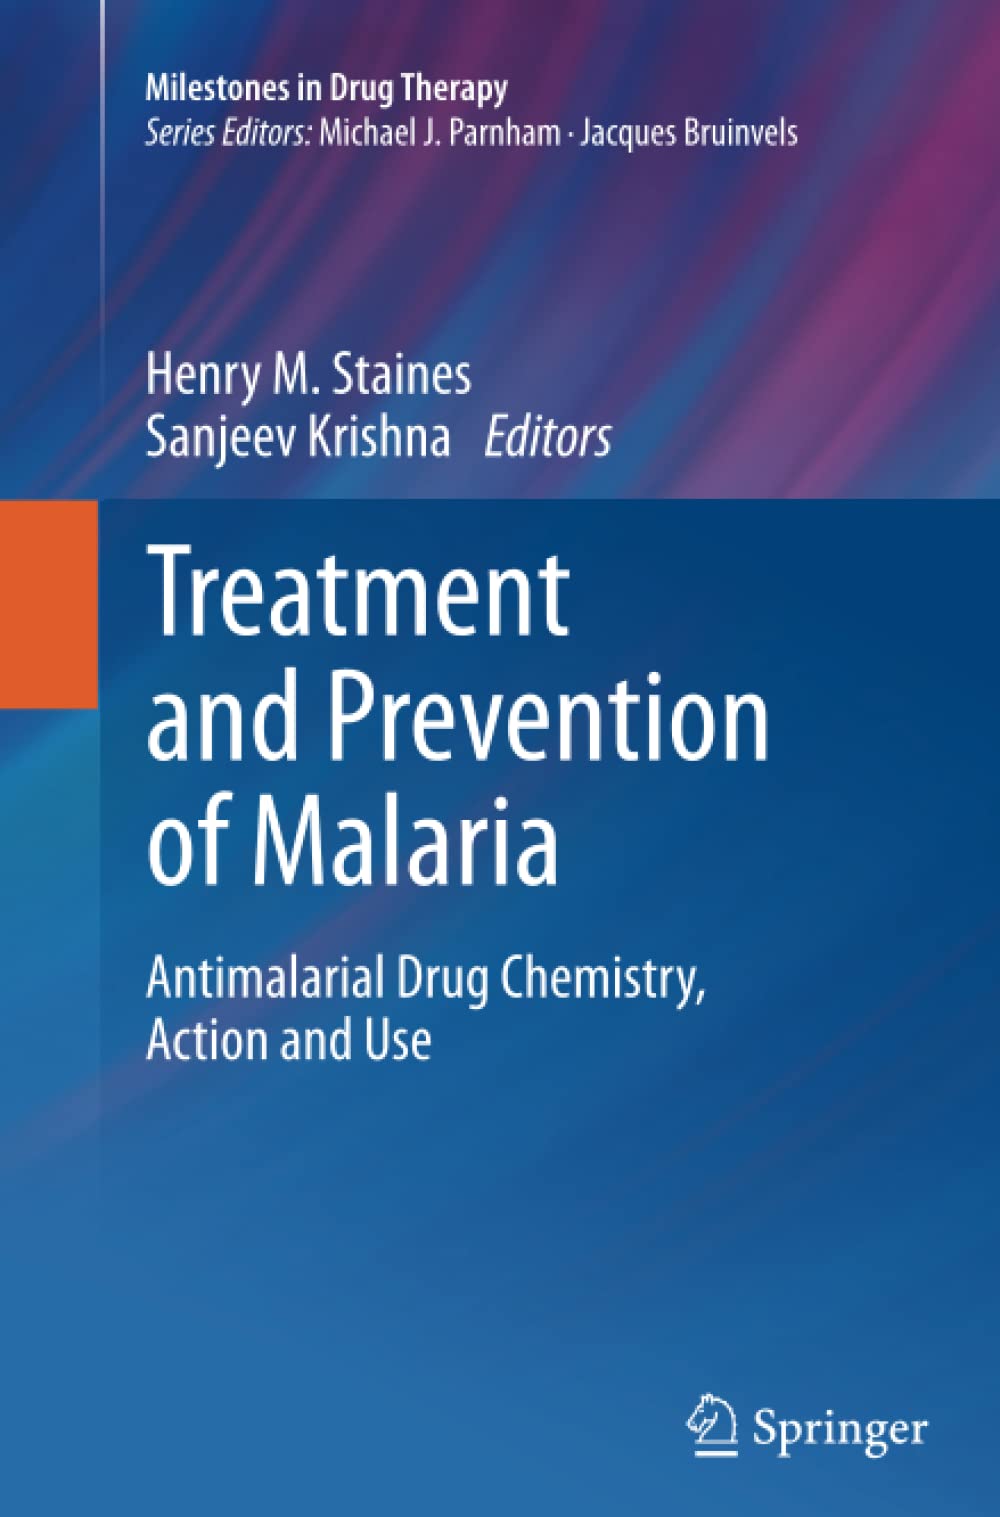 Treatment and Prevention of Malaria: Antimalarial Drug Chemistry, Action and Use (Milestones in Drug Therapy)